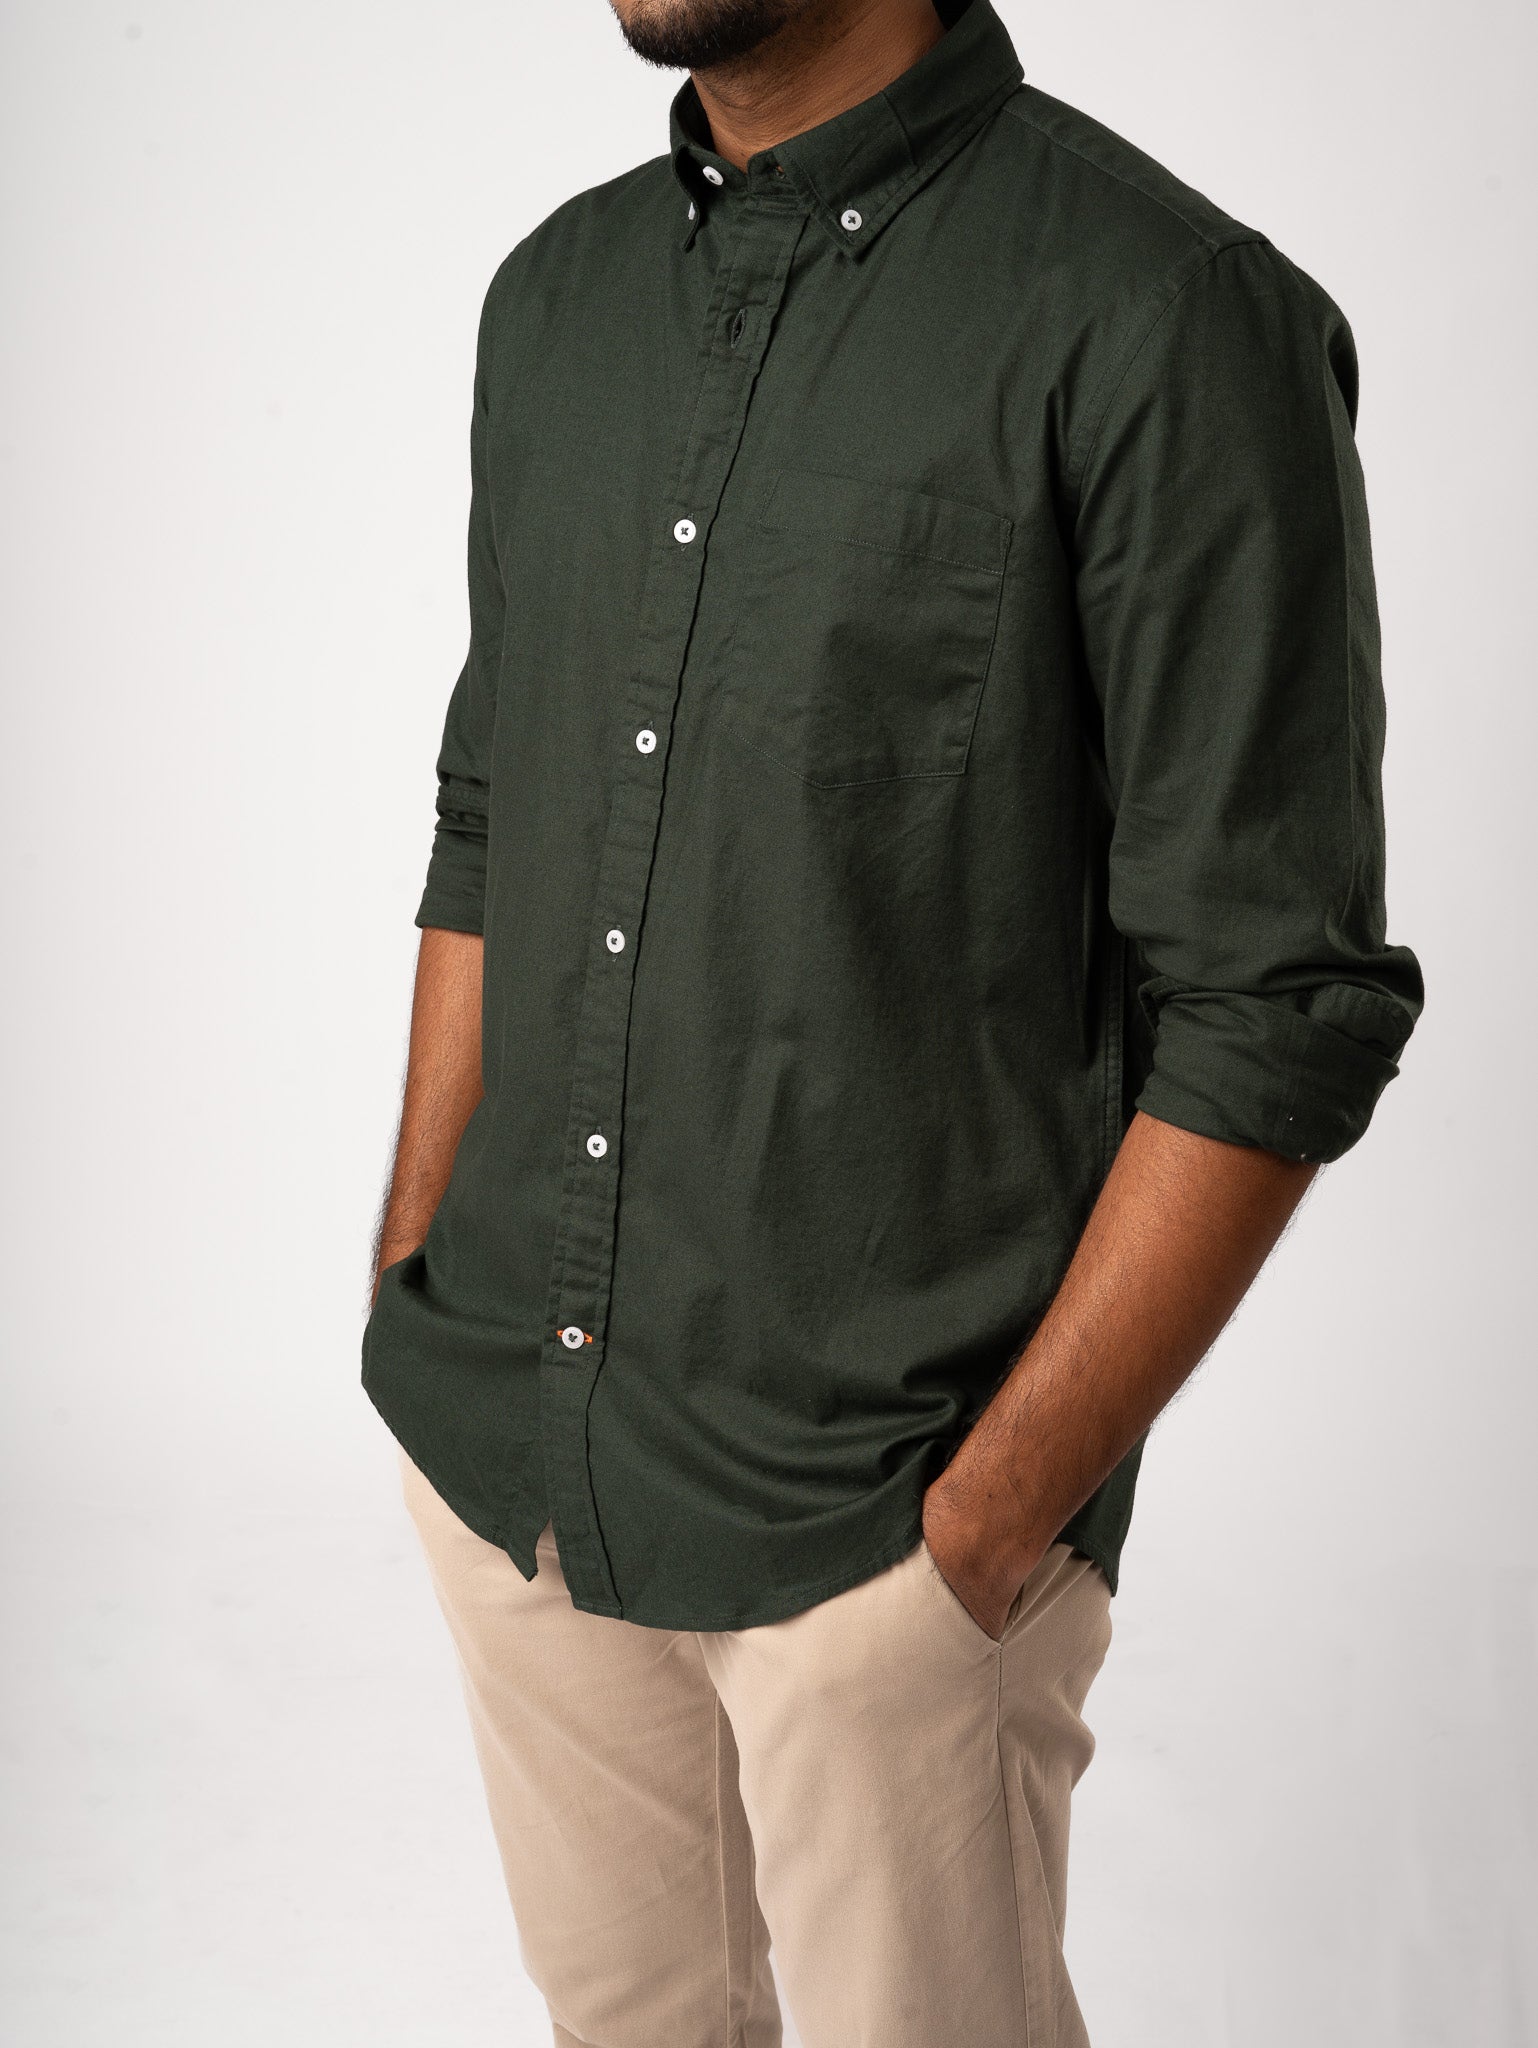 Bare Brown Solid Cotton Oxford Shirt, Slim Fit with Full Sleeves - Green